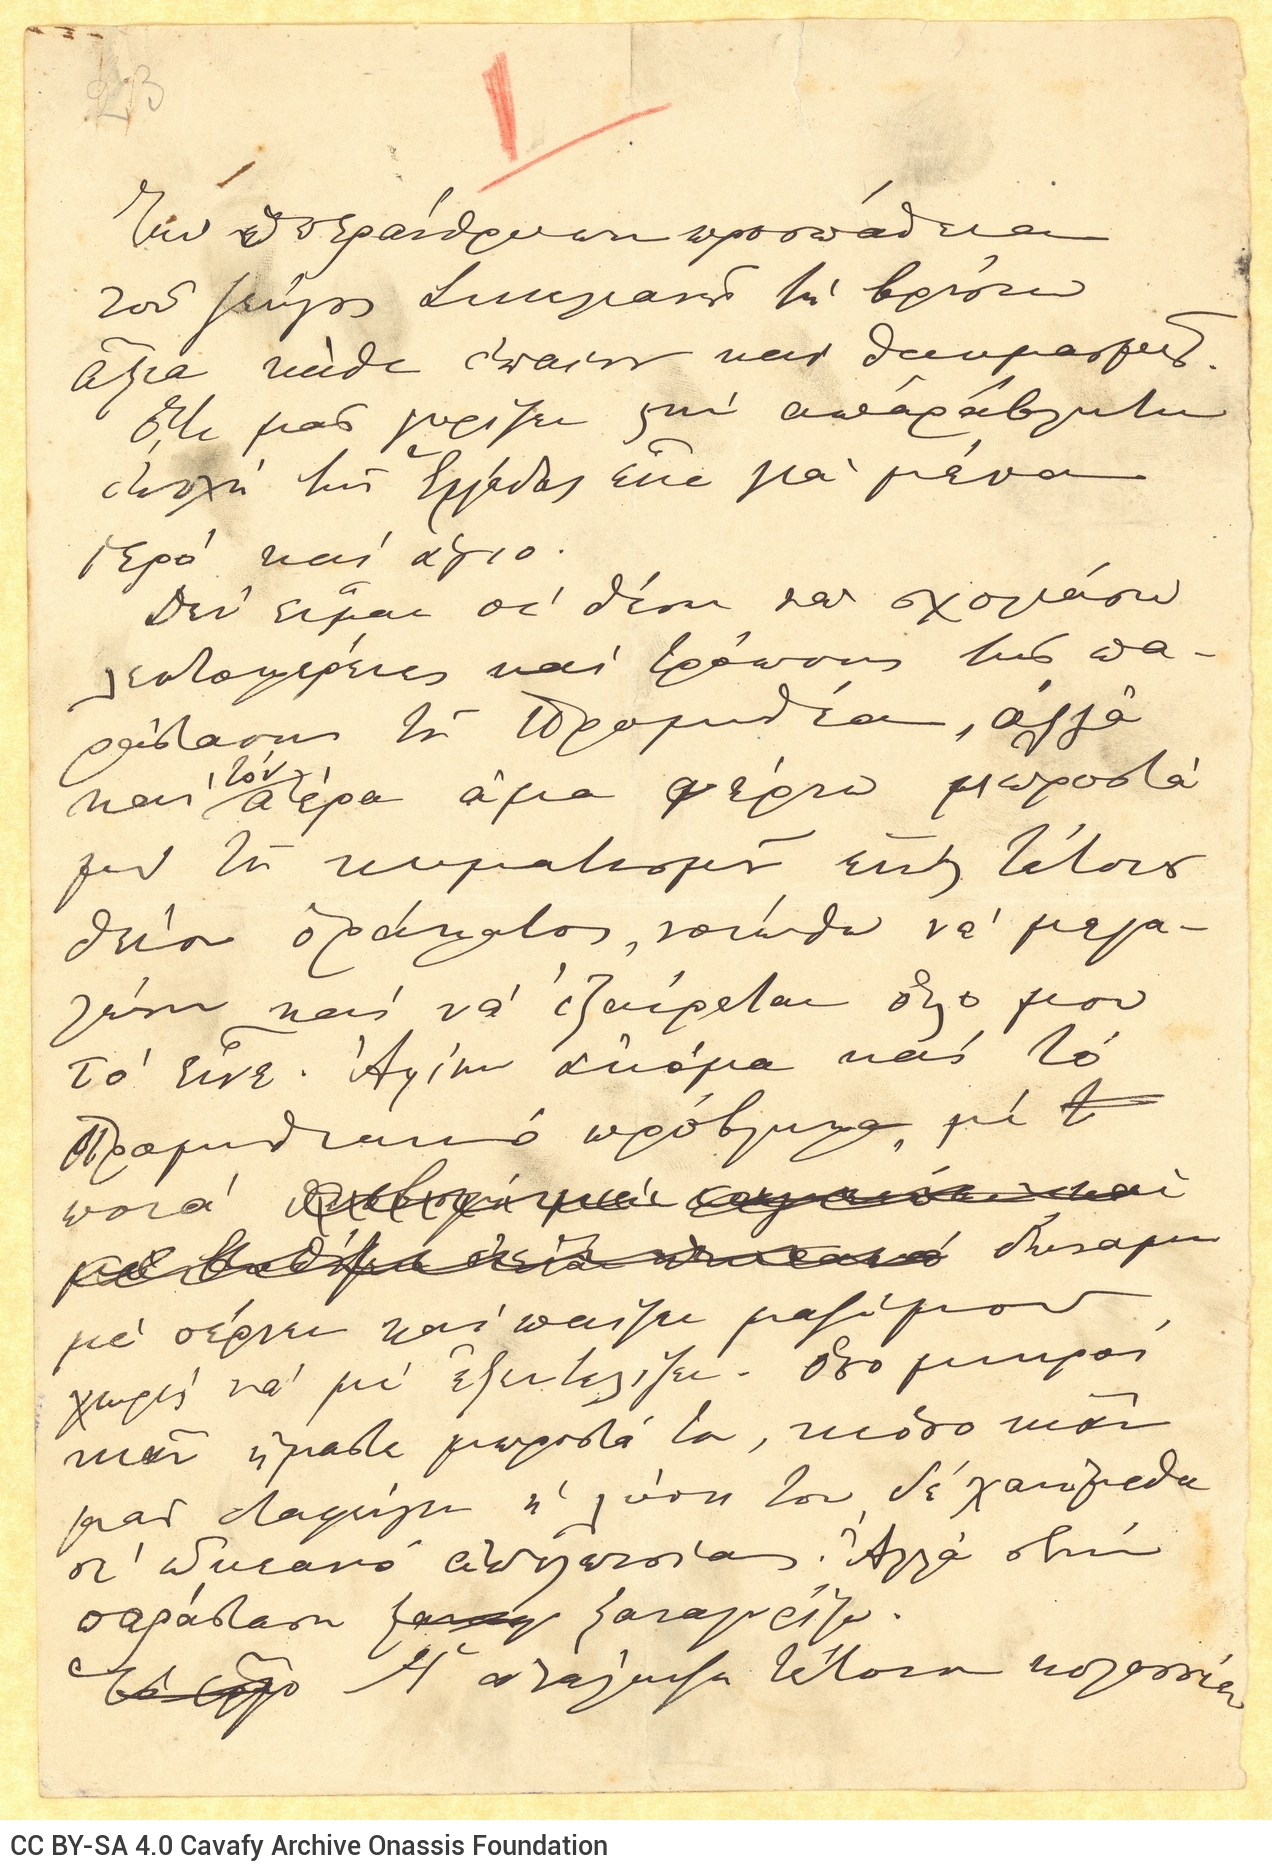 Handwritten text regarding the Delphic Festival on one side of two sheets. The author expresses his admiration for the event;